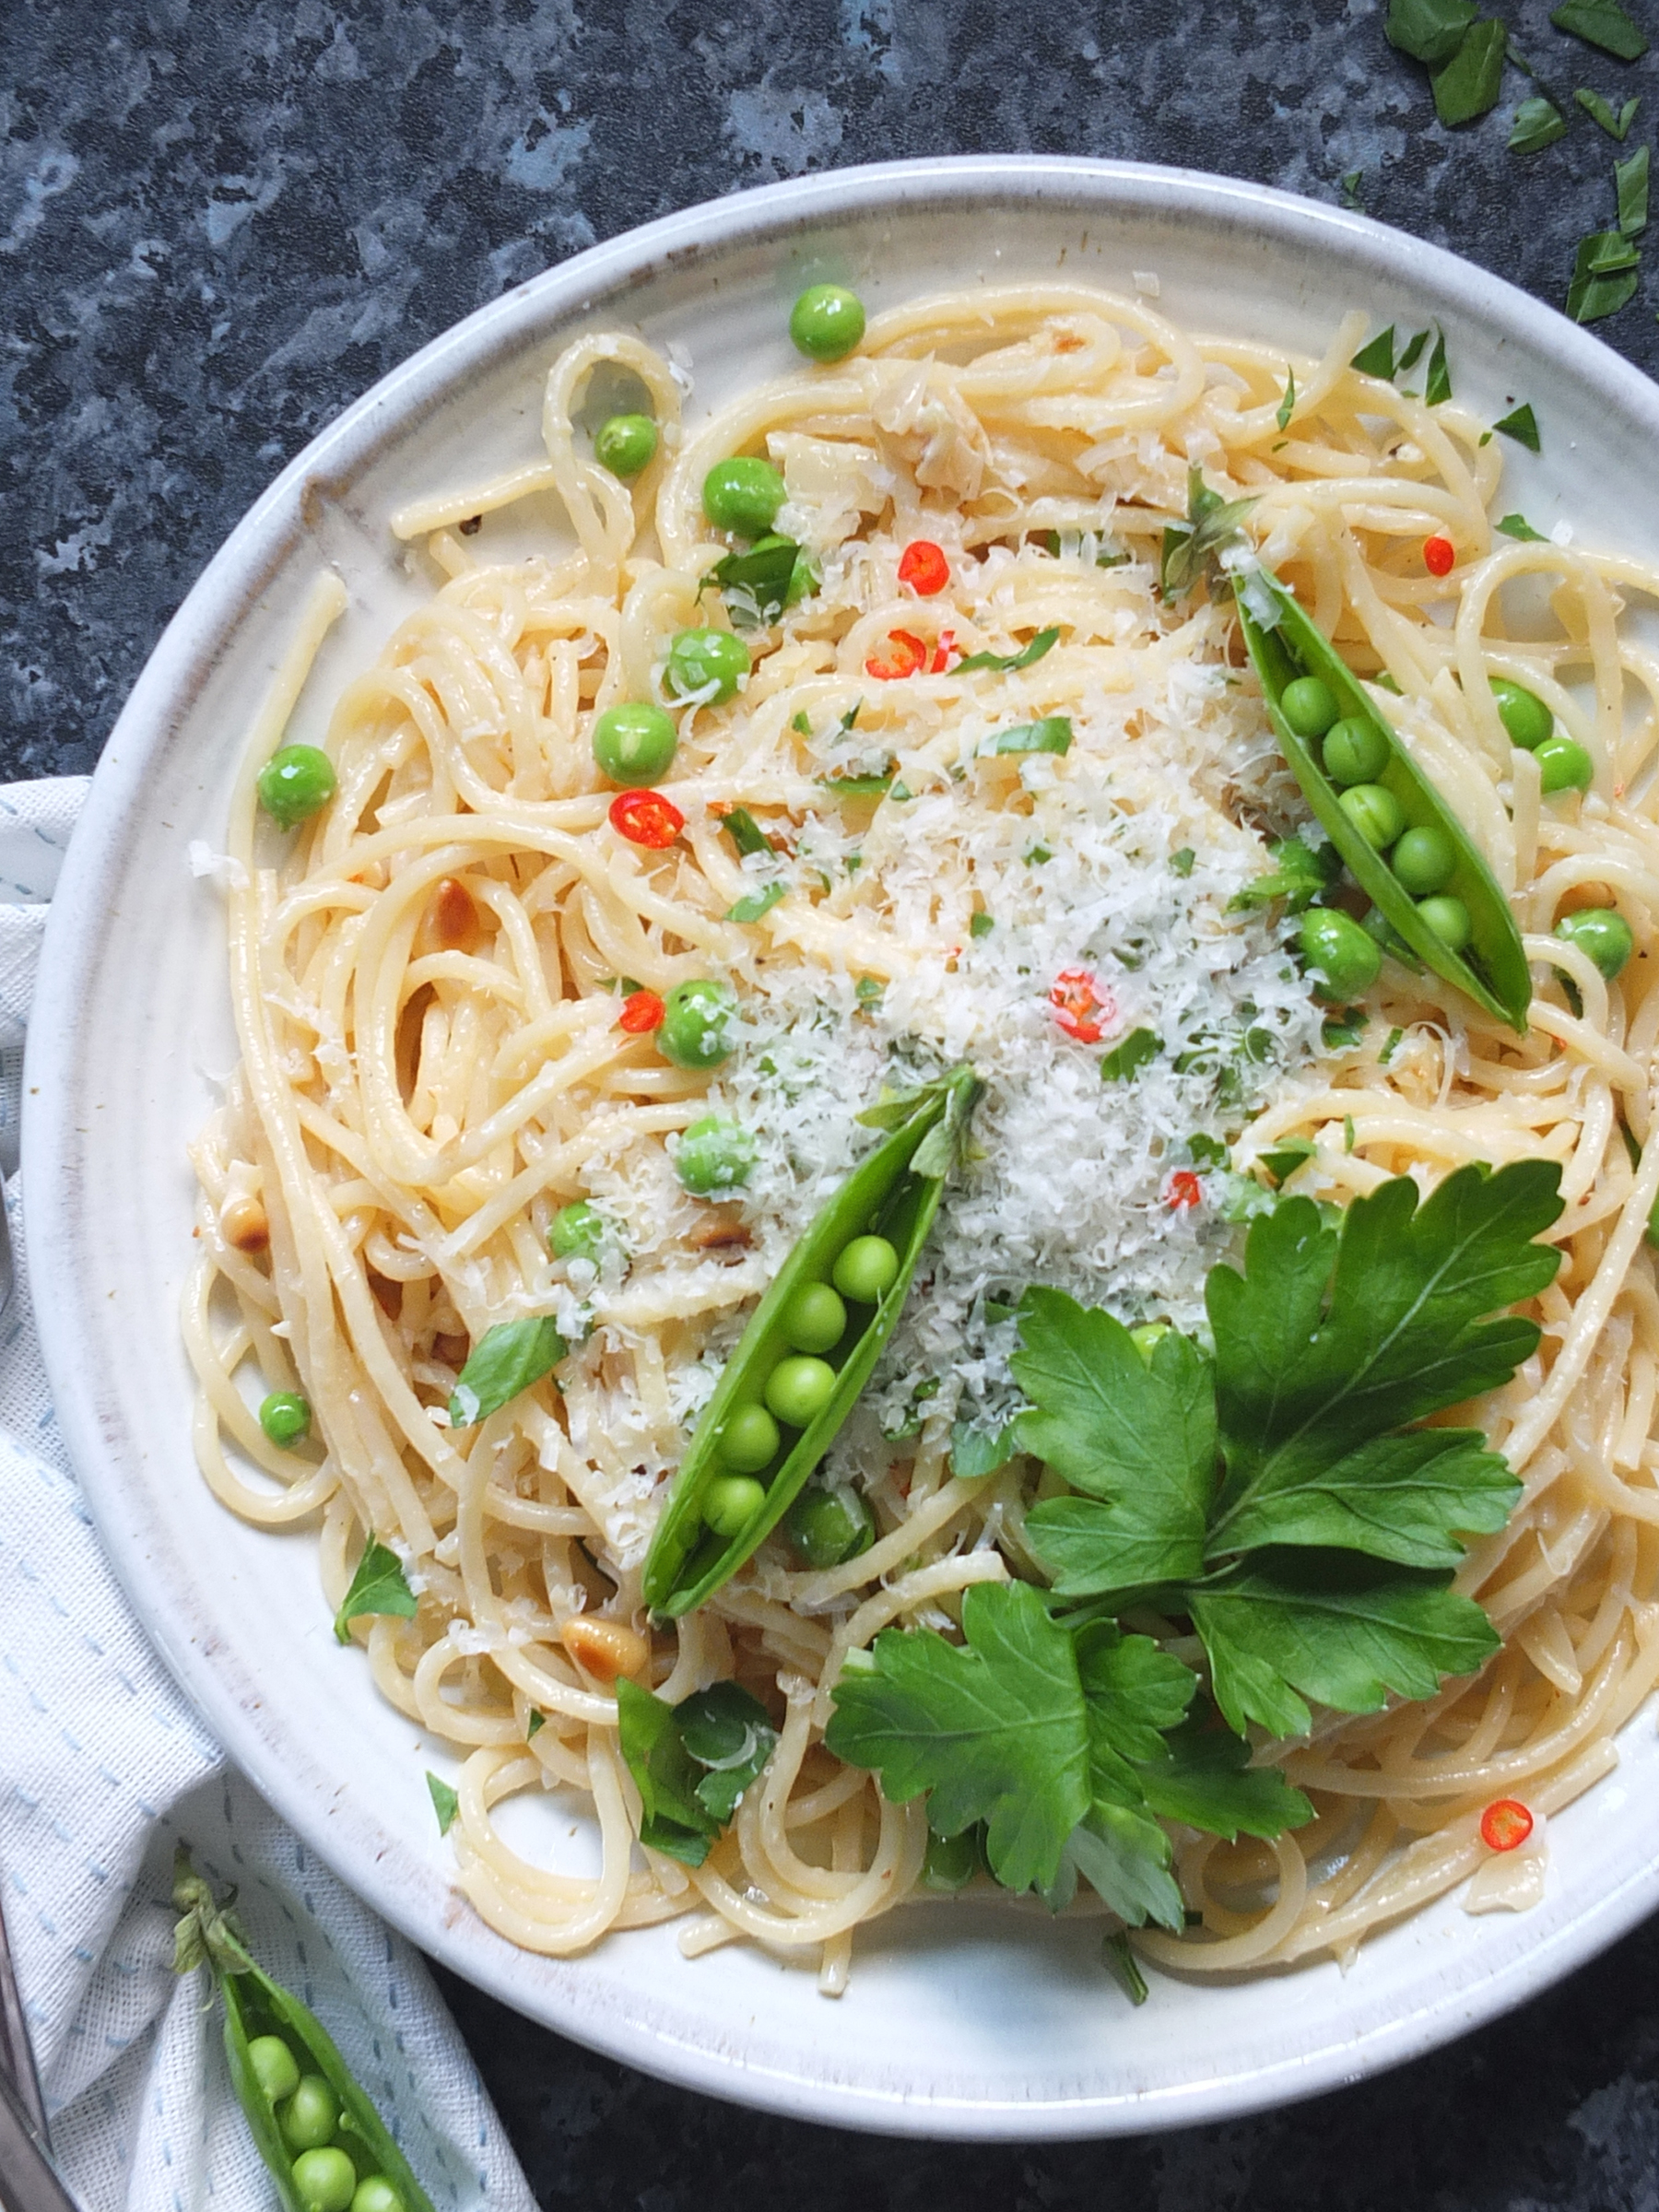 Close up image of spaghetti pasta with green peas recipe. There are two open pea pods as a garnish on the top, it's pretty.